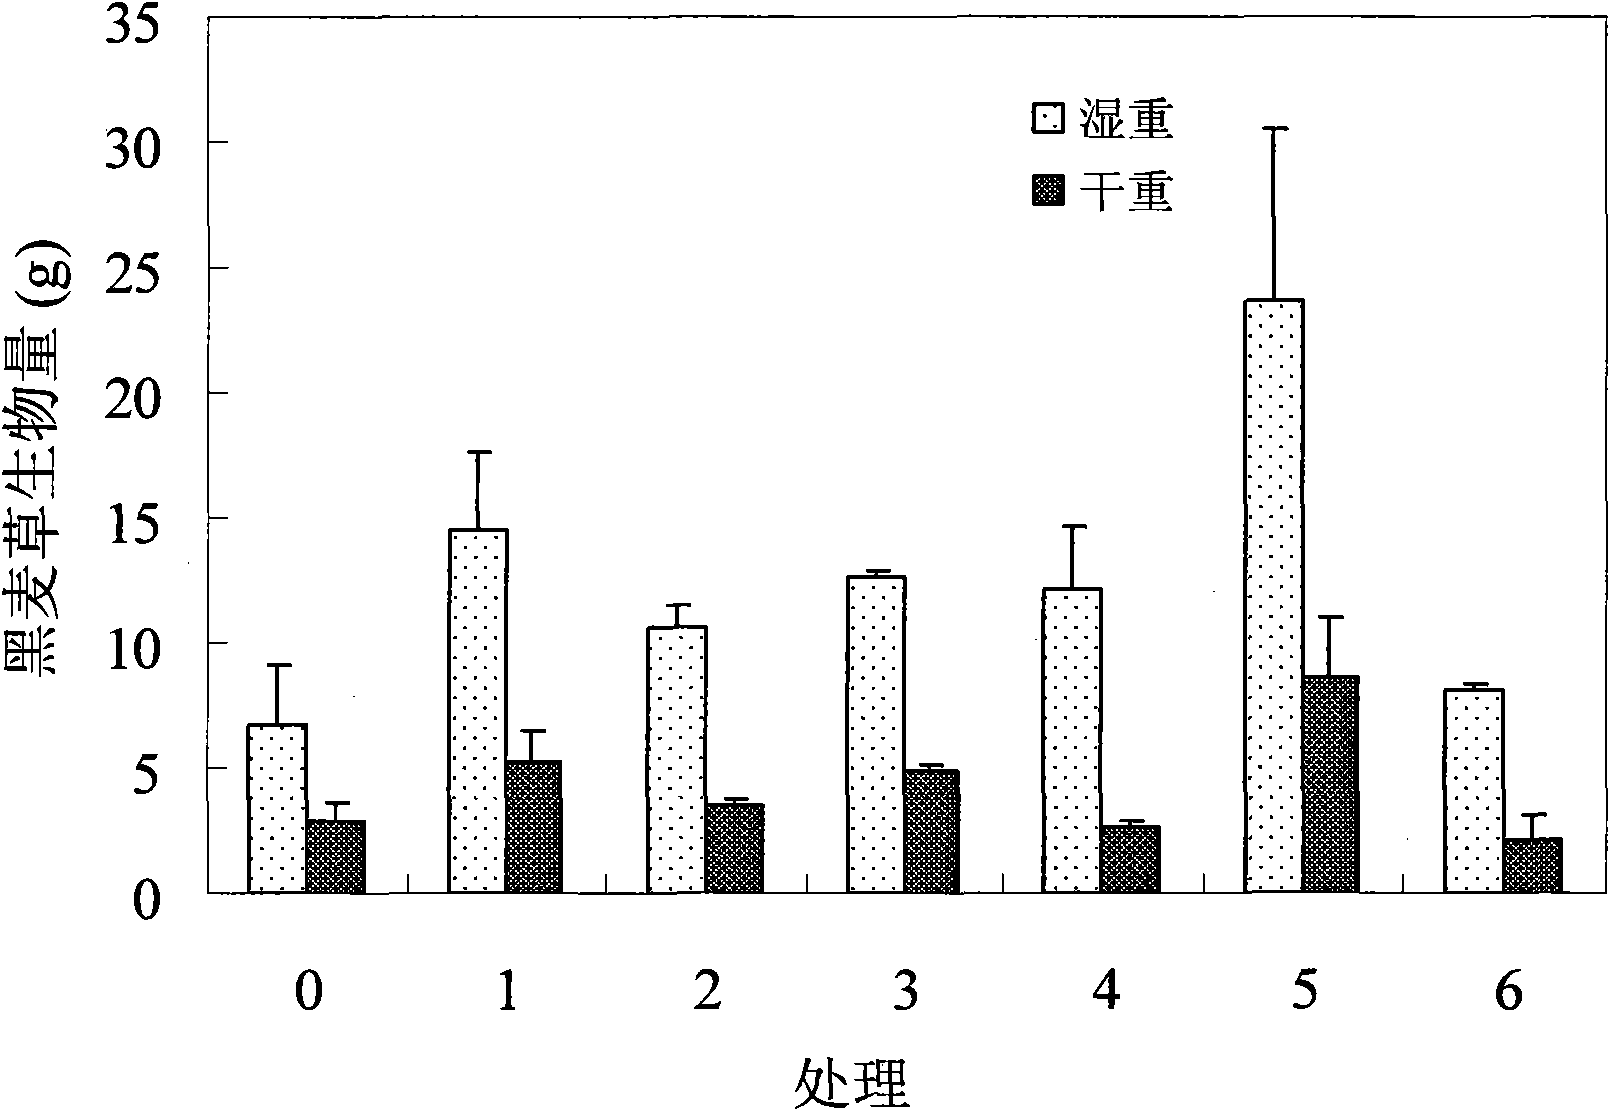 Method for restoring petroleum-polluted saline alkali soil by ryegrass and high efficiency microbes